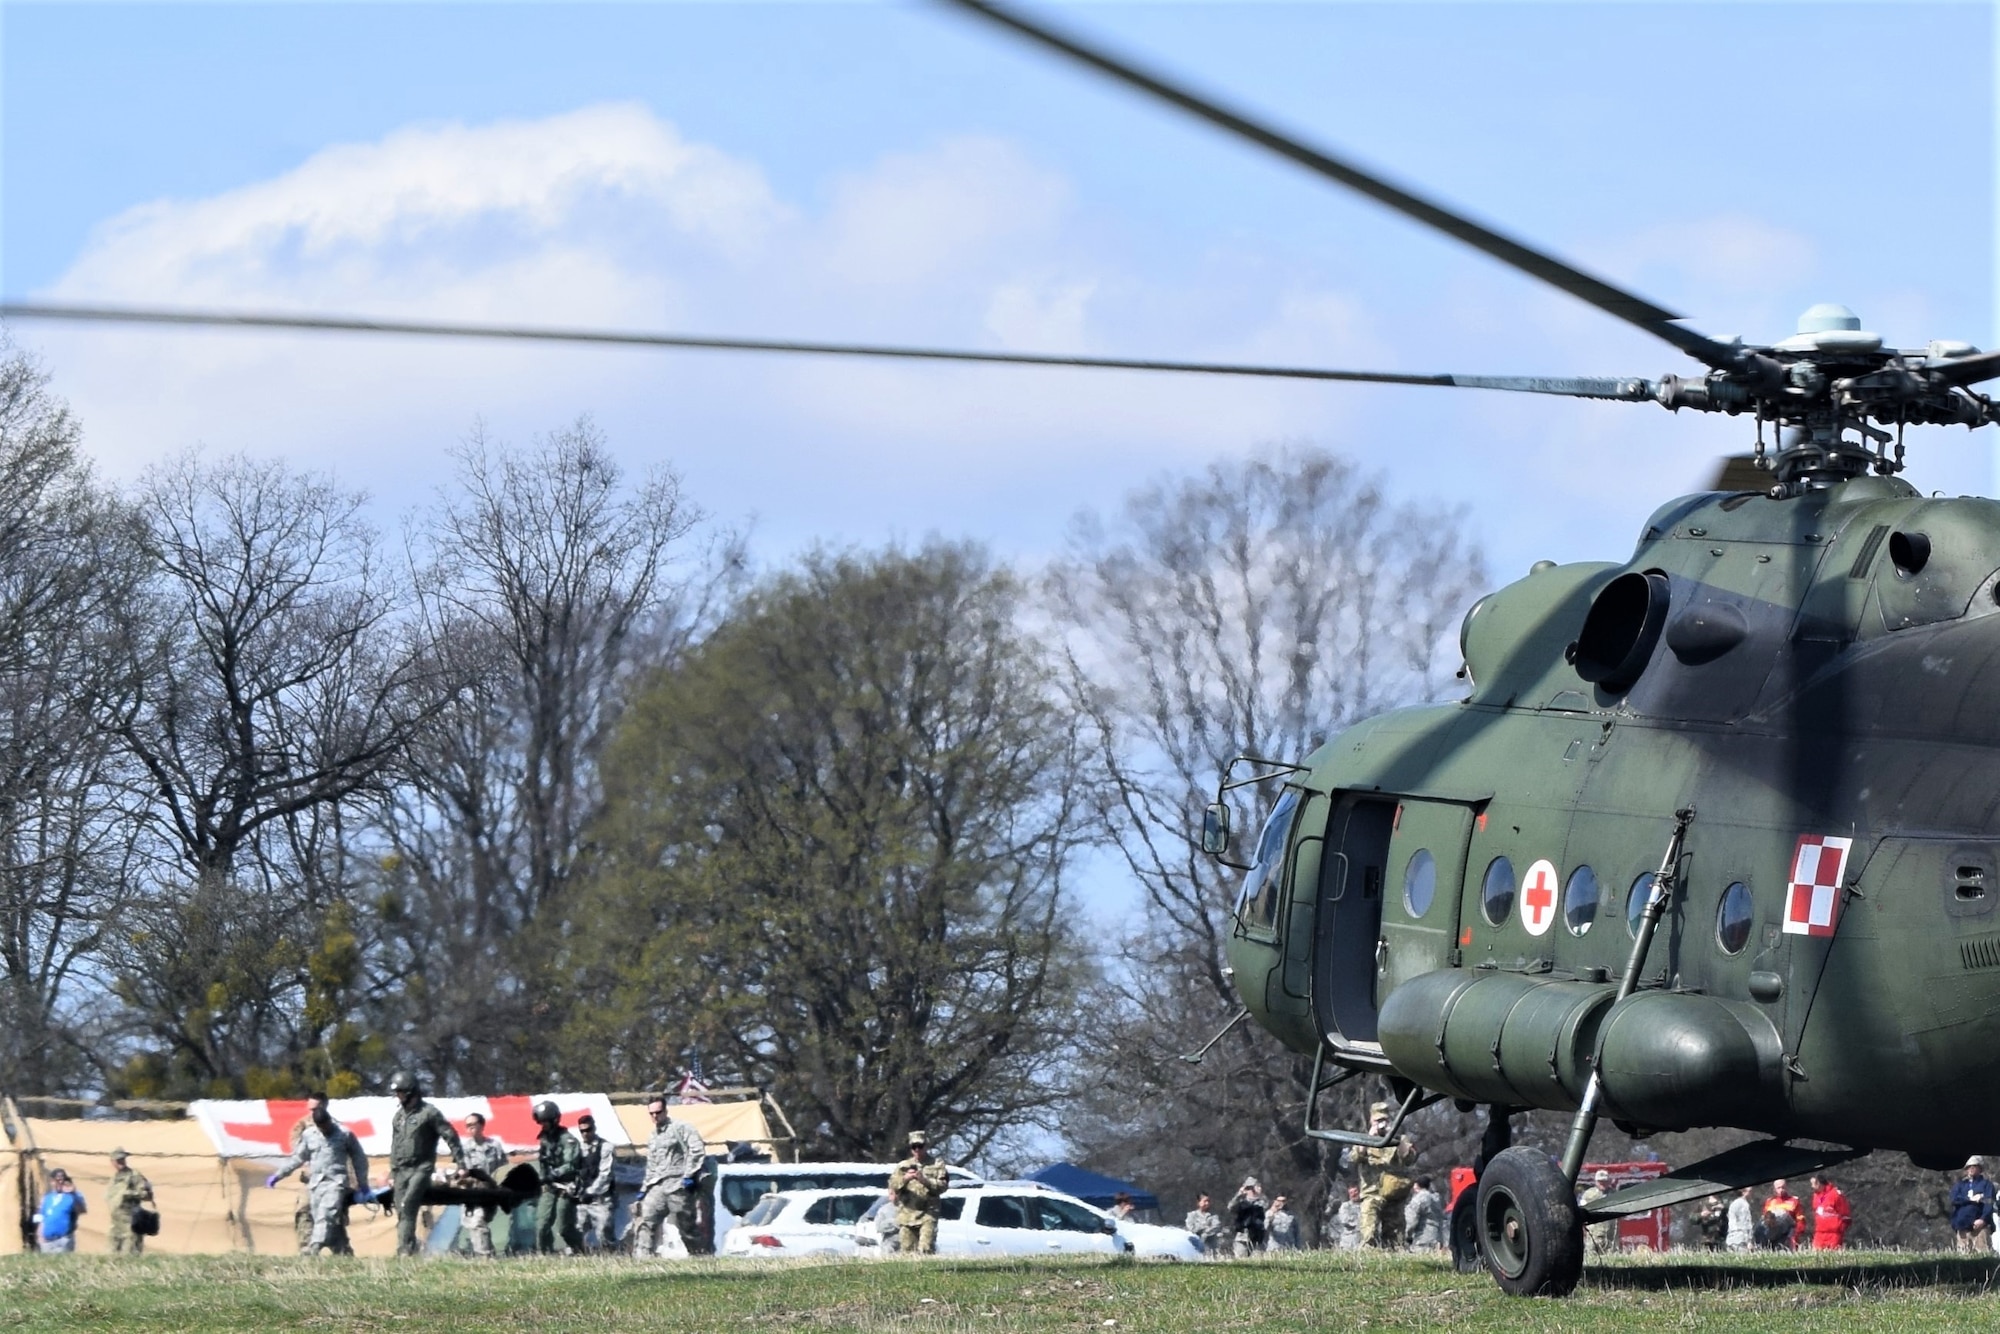 Airmen from the 86th Medical Group, Ramstein Air Base, Germany, participate in a multinational medical evacuation exercise drill with a Polish Mi-17 helicopter during Vigorous Warrior 19, Cincu Military Base, Romania, April 9, 2019. About 50 Airmen from the 86th MDG participated in Vigorous Warrior 19, NATO’s largest-ever military medical exercise. (U.S. Air Force photo by 1st Lt. Andrew Layton)